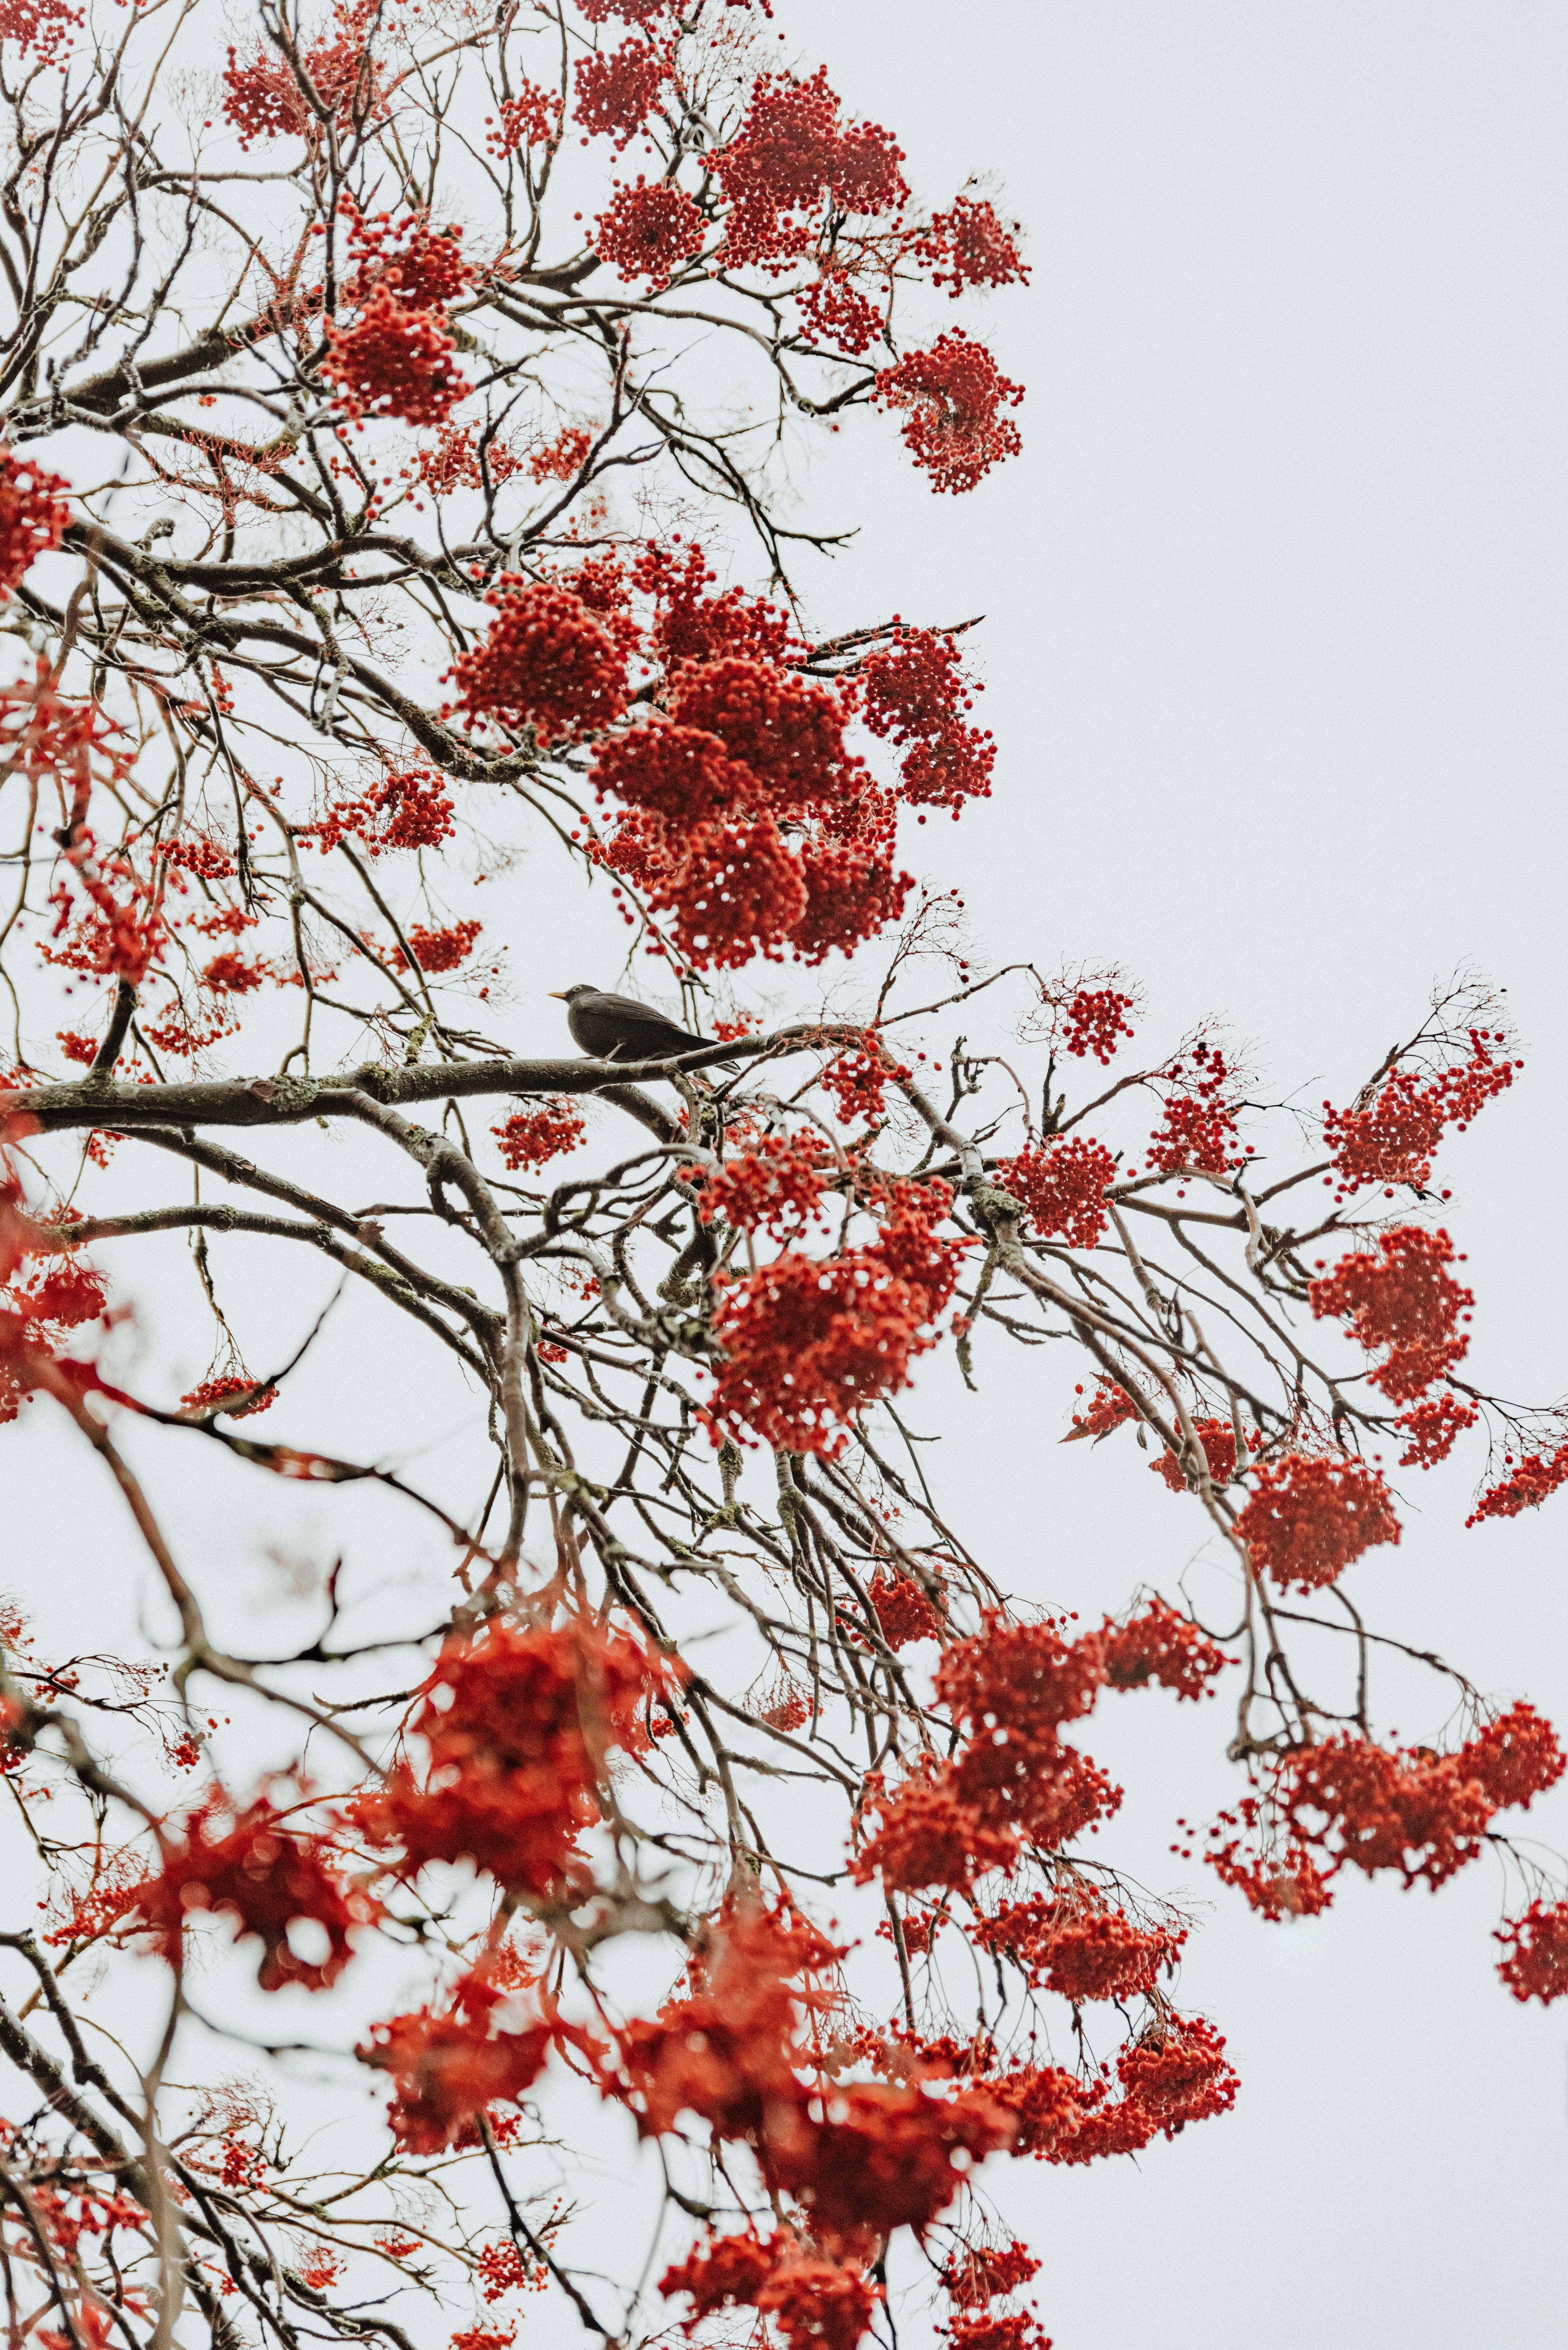 nature, berries, red, bird, wood, tree, bunches, clusters